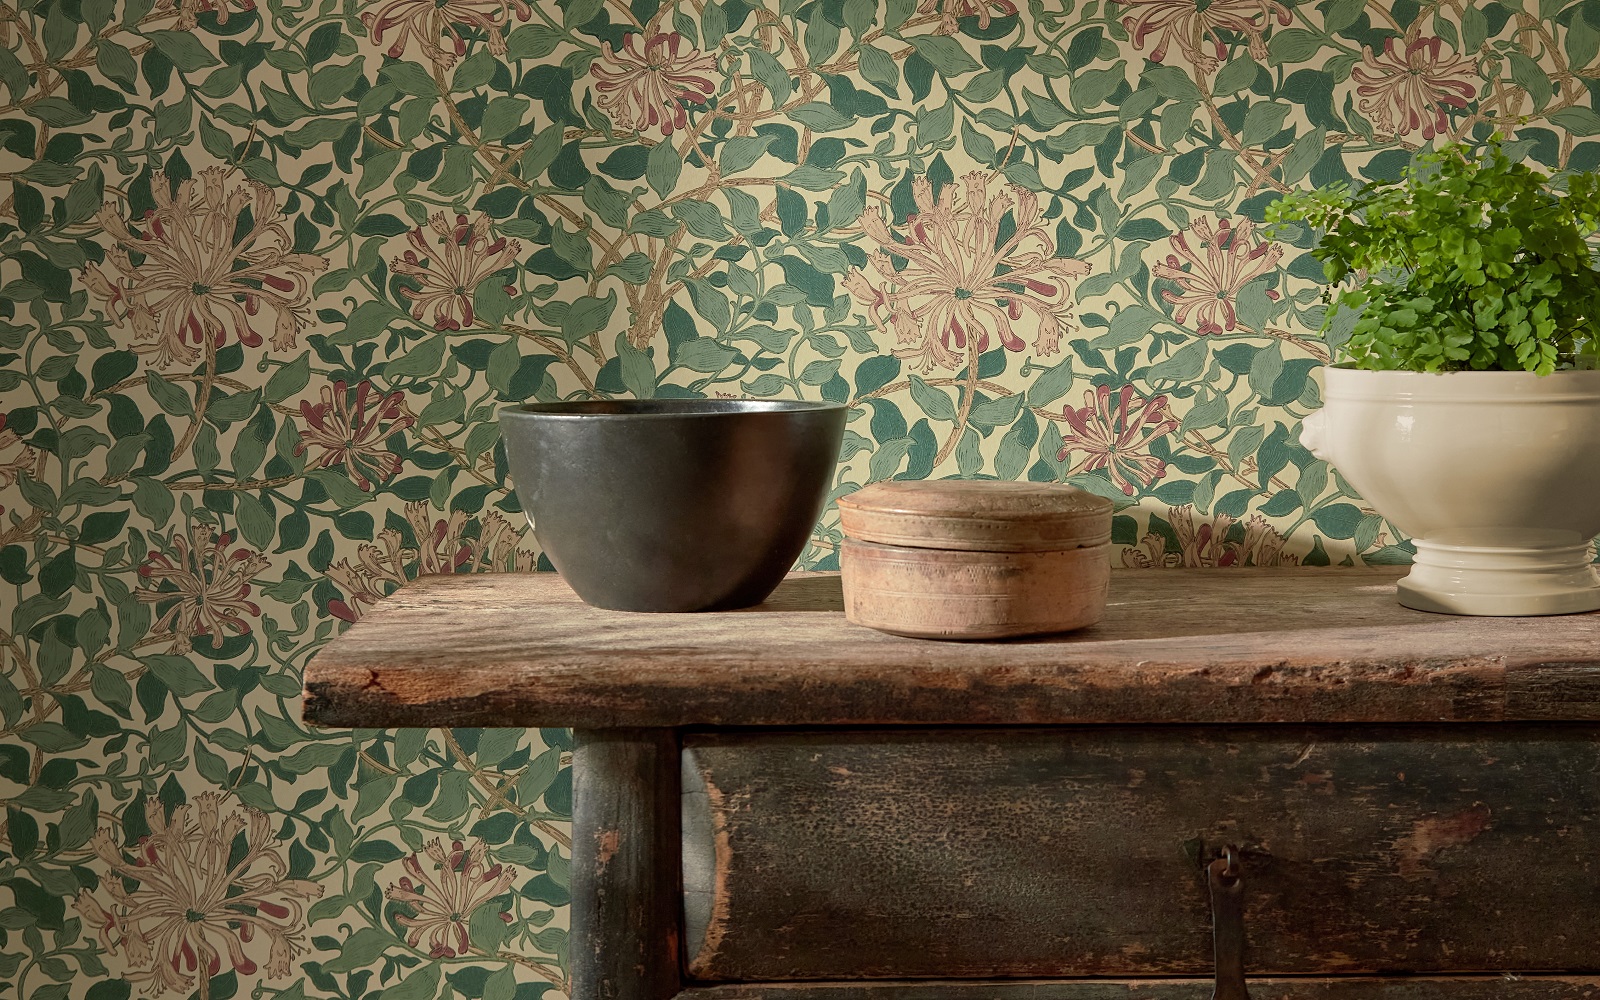 wooden shelf with bowls in front of morris & co wallpaper